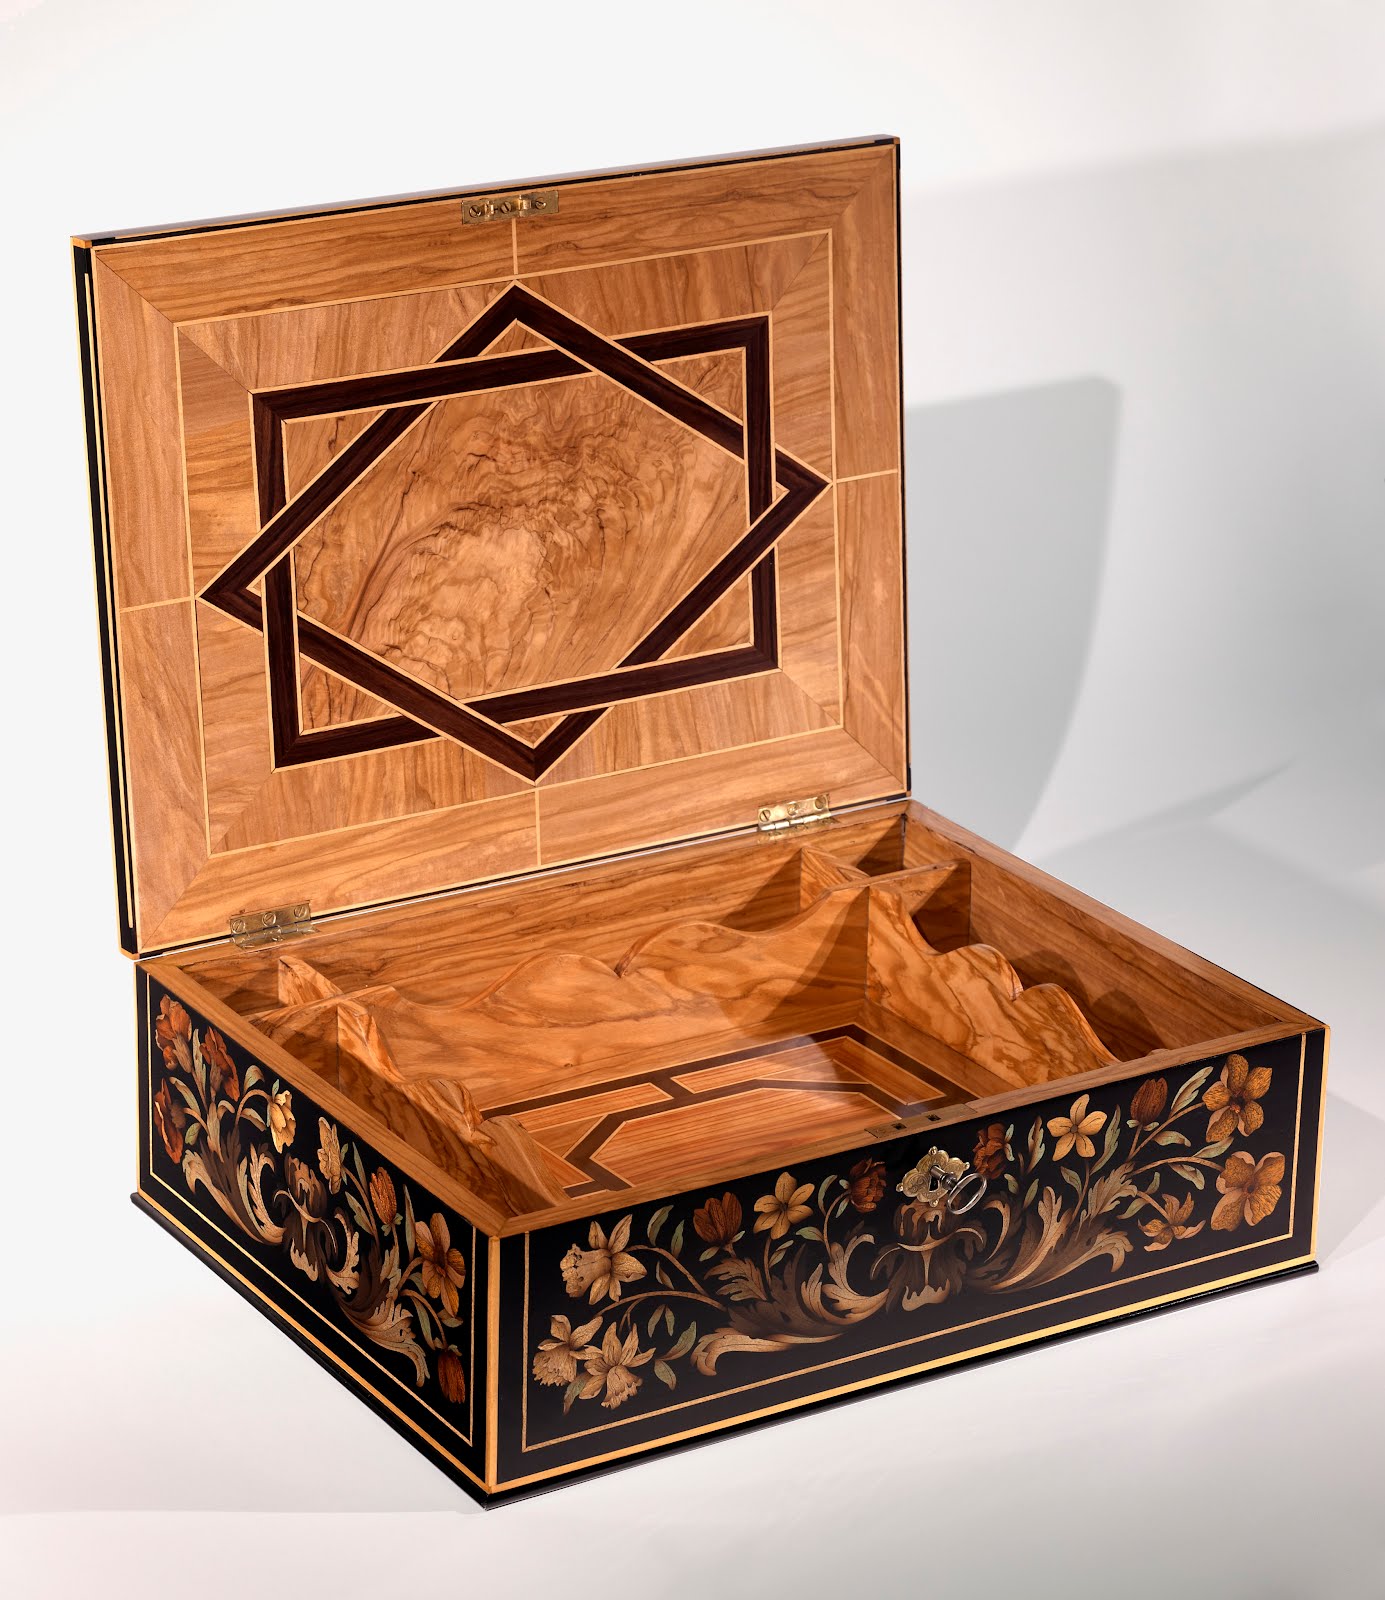 Wooden Boxes With Secret Compartments We are producing 4 boxes with